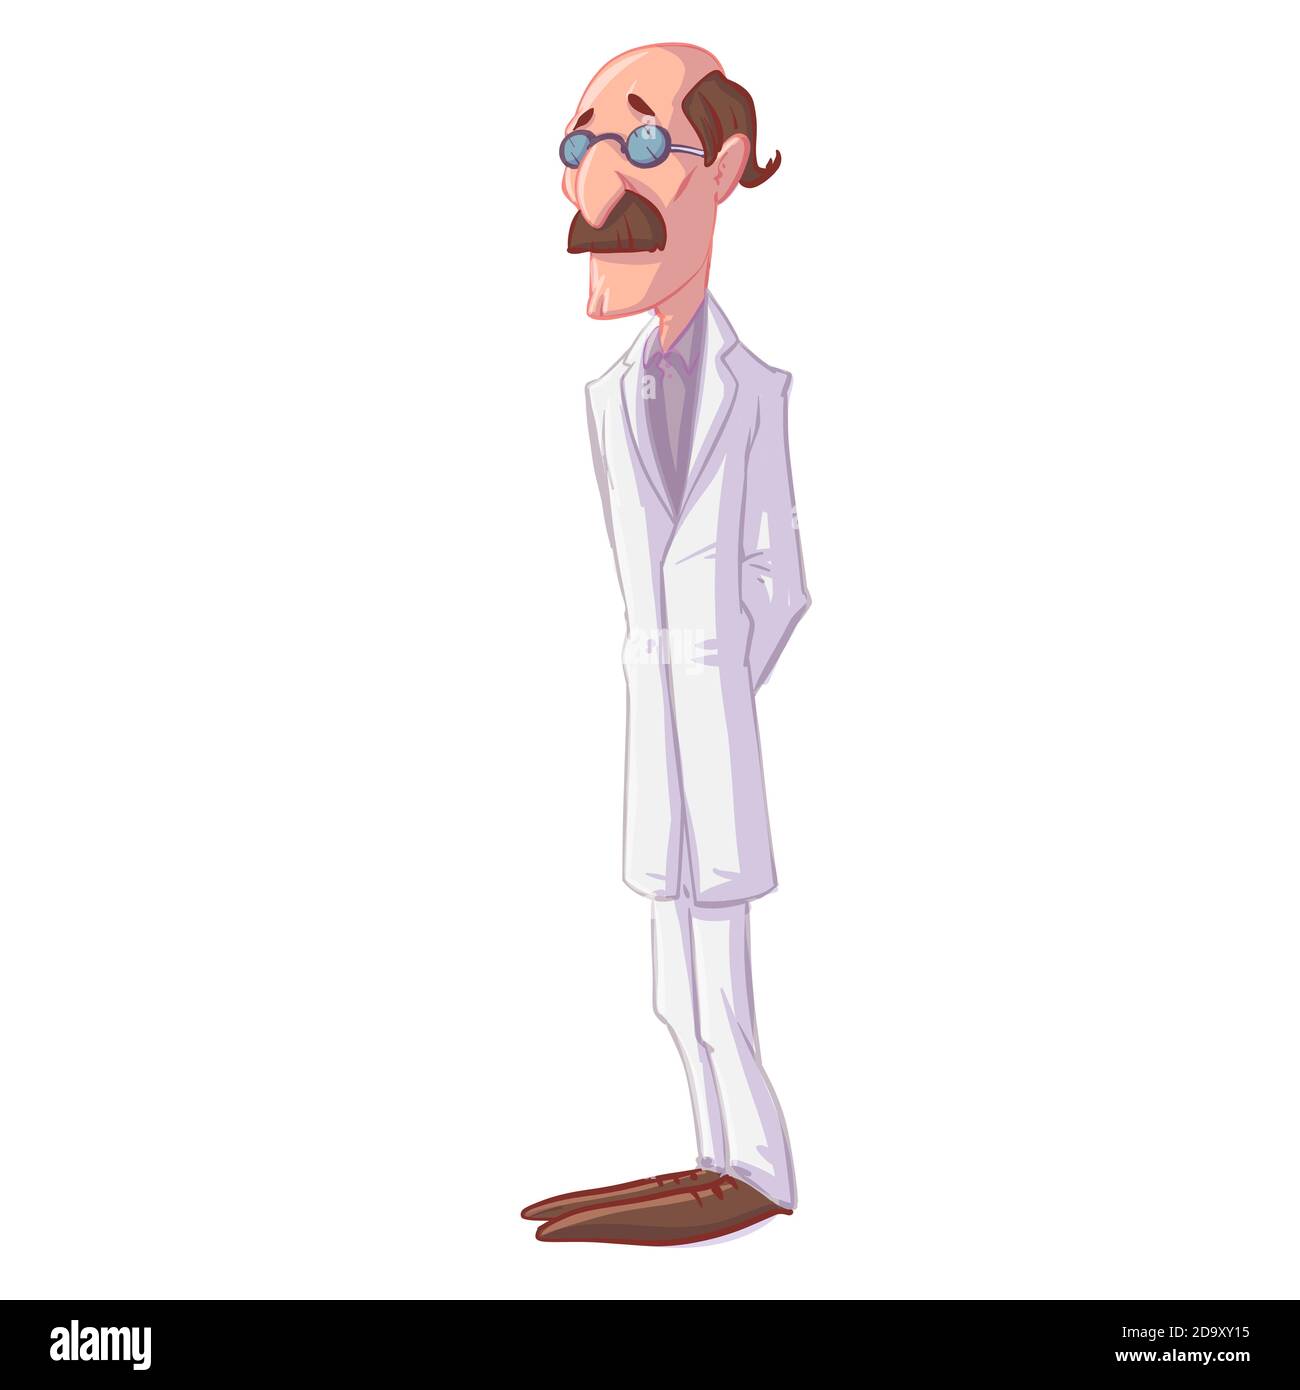 Colorful vector illustration of a cartoon doctor with mustache Stock Vector